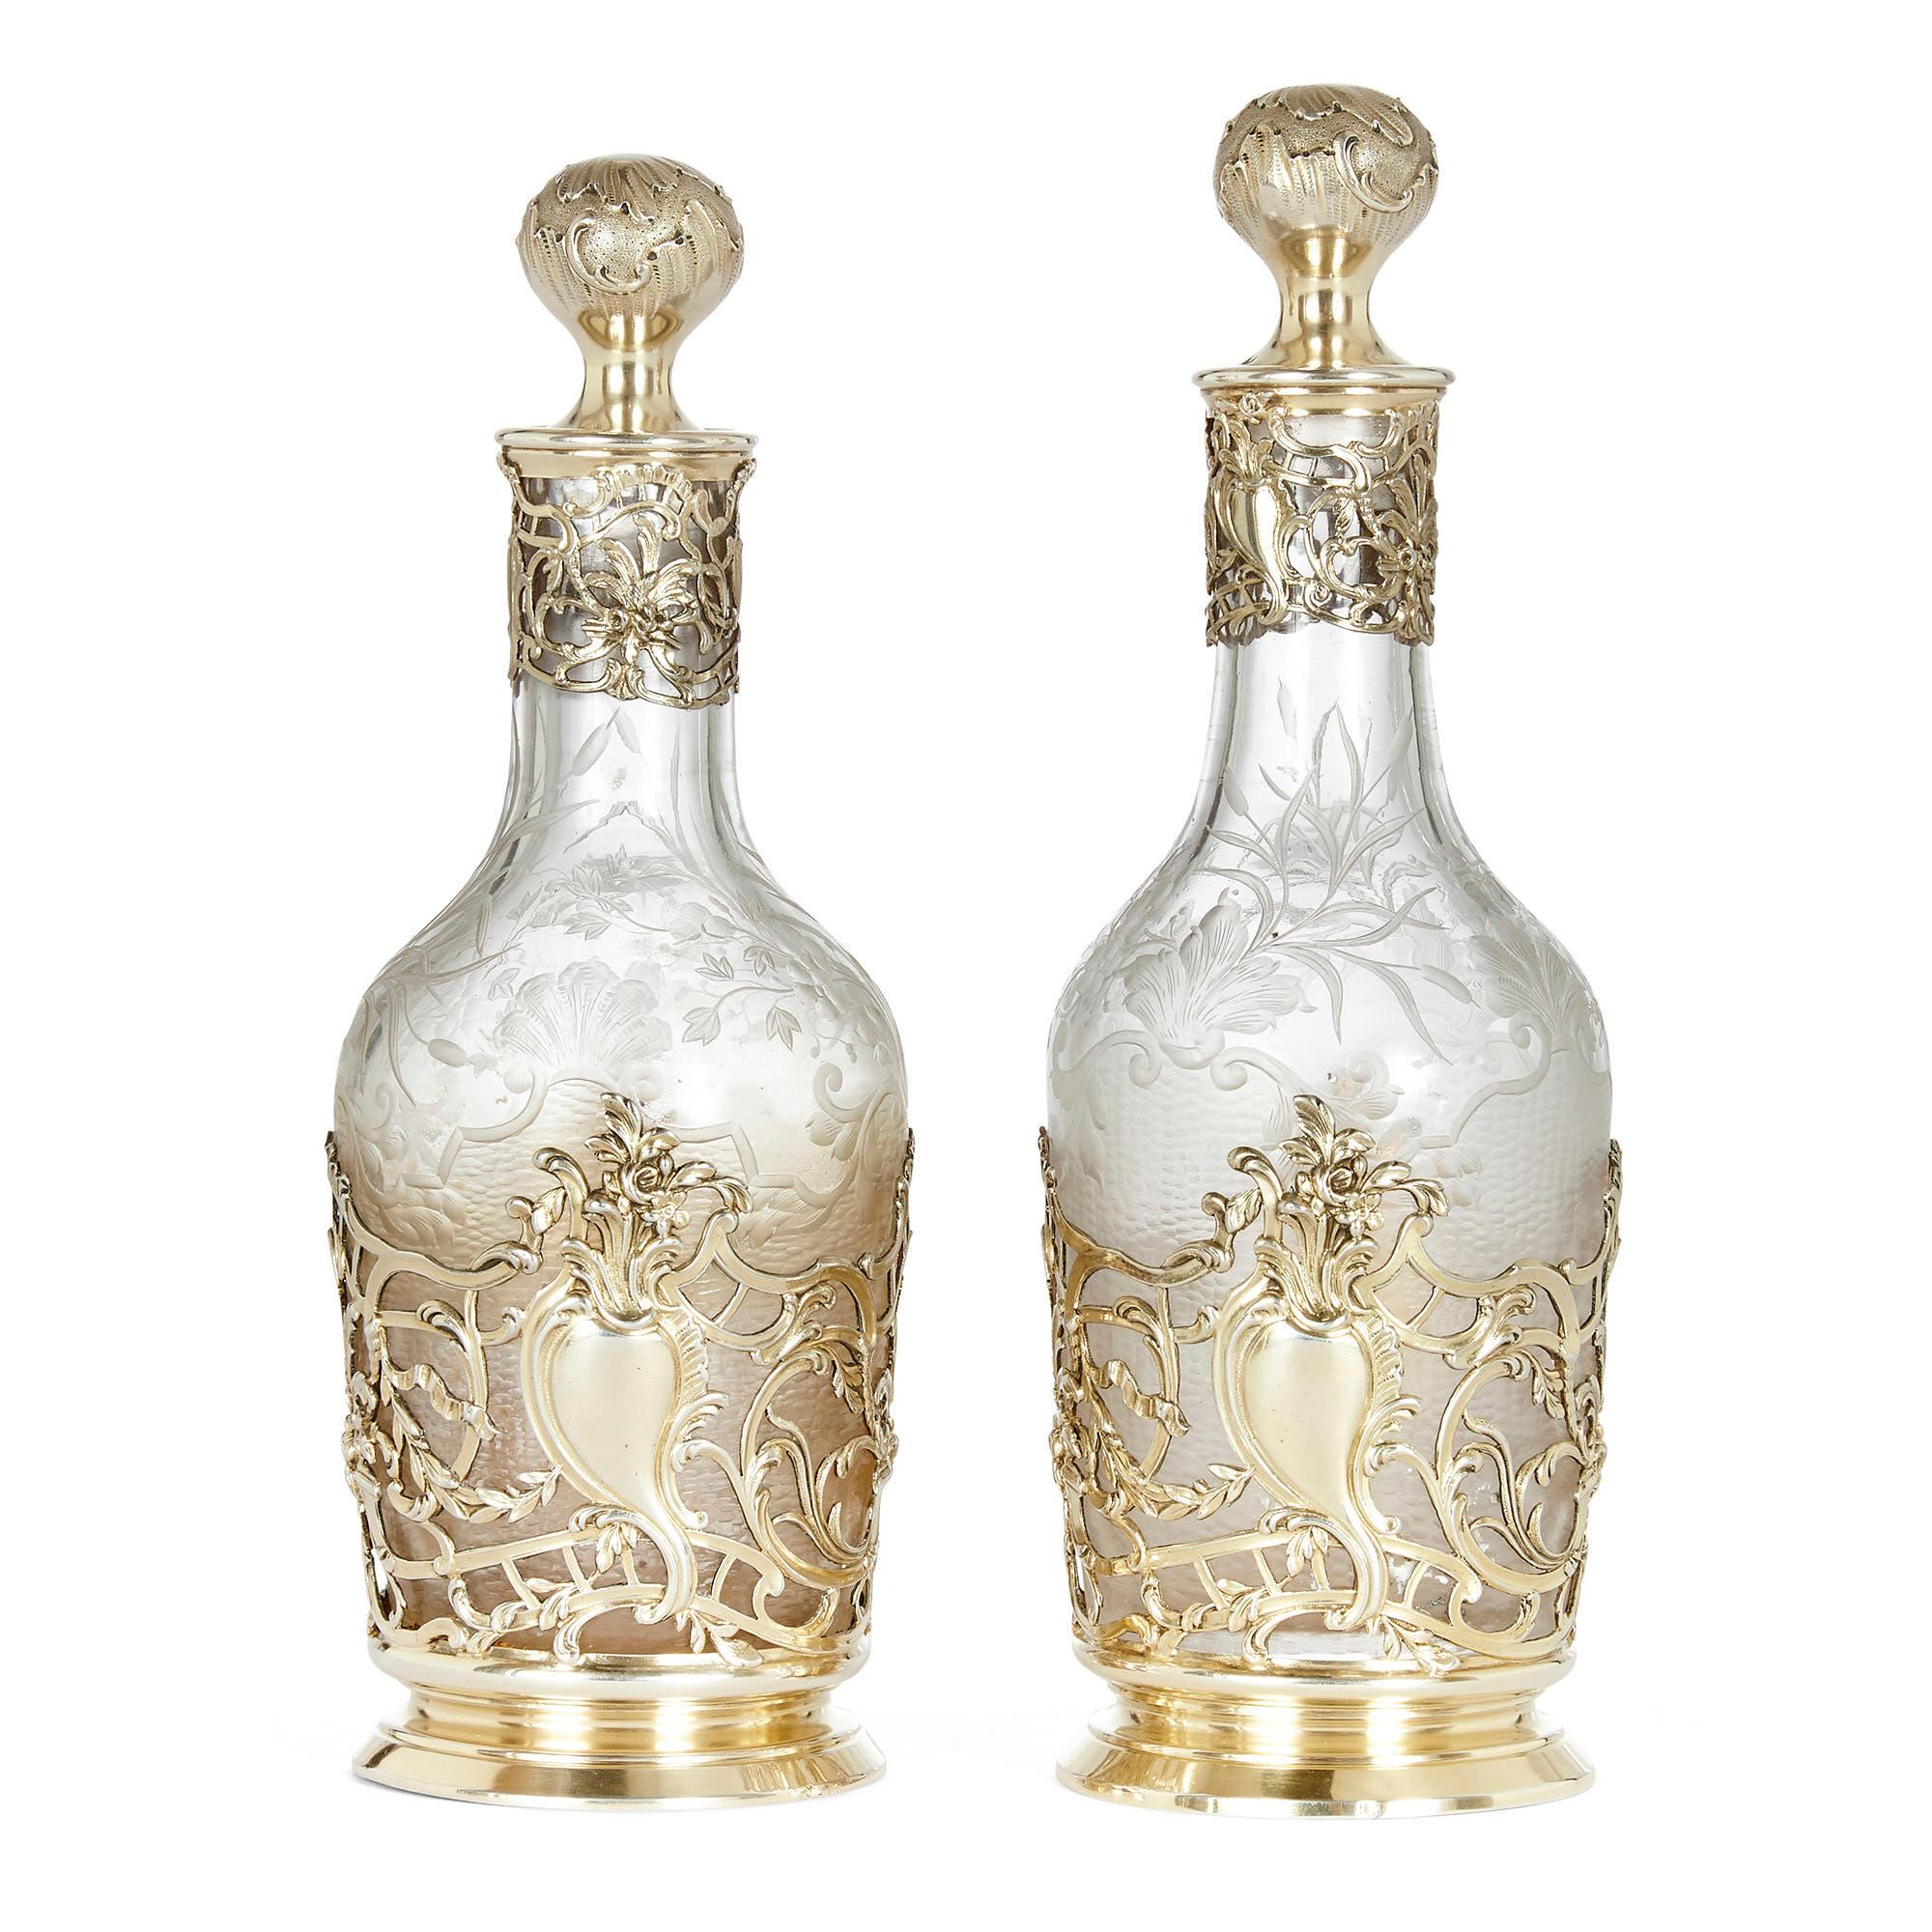 Pair of 19th century silver and crystal decanters
French, late 19th century
Measures: Height 22cm, diameter 8cm

This fine pair of decanters is by Tétard Frères silversmiths, and bears Minerva hallmarks. They are each hung with white floral